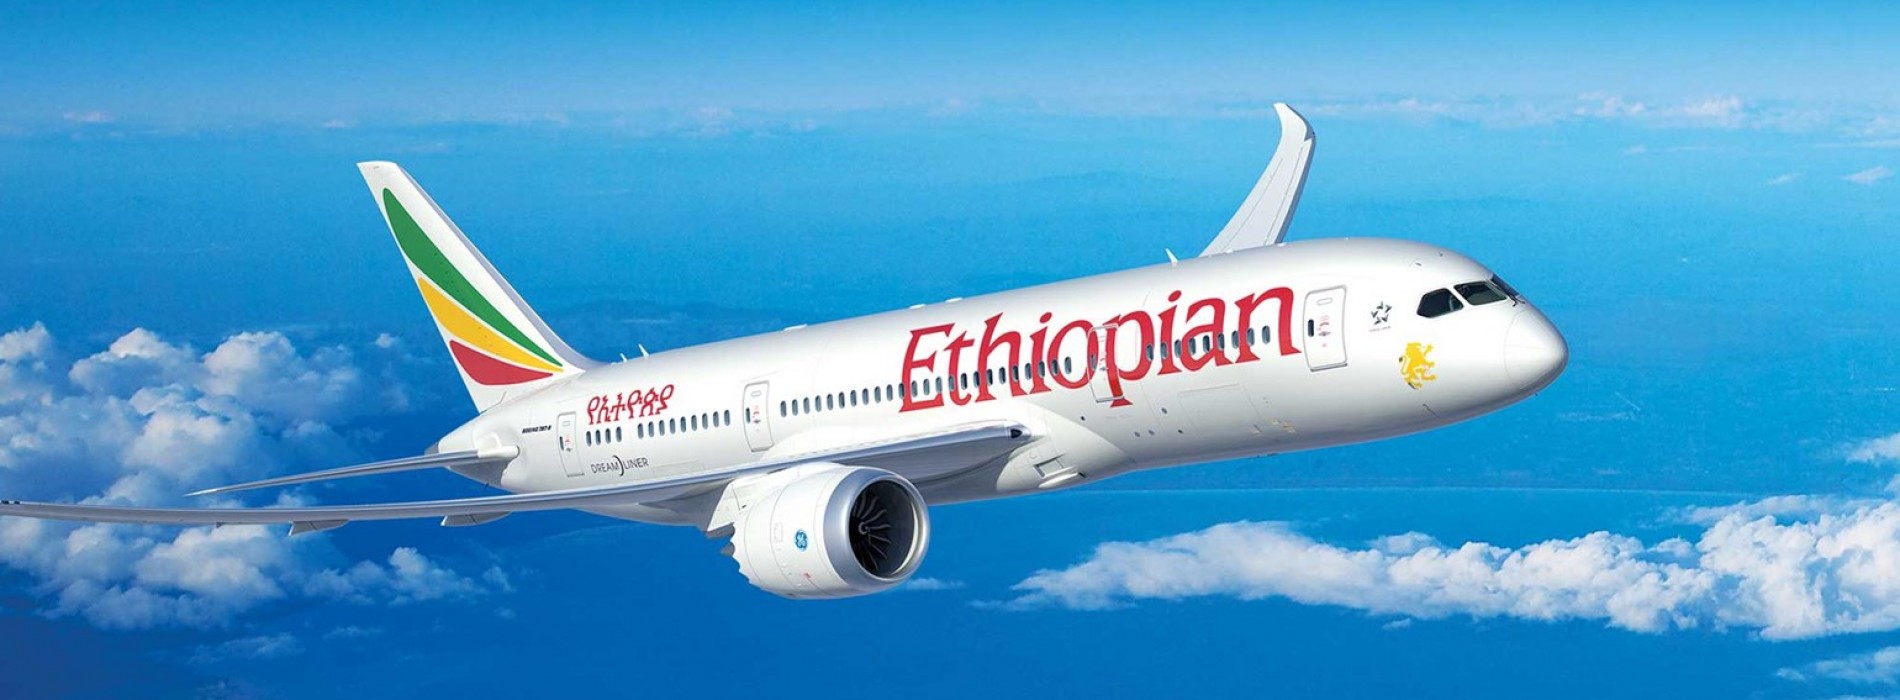 Ethiopian marks African Aviation History with 100th Aircraft